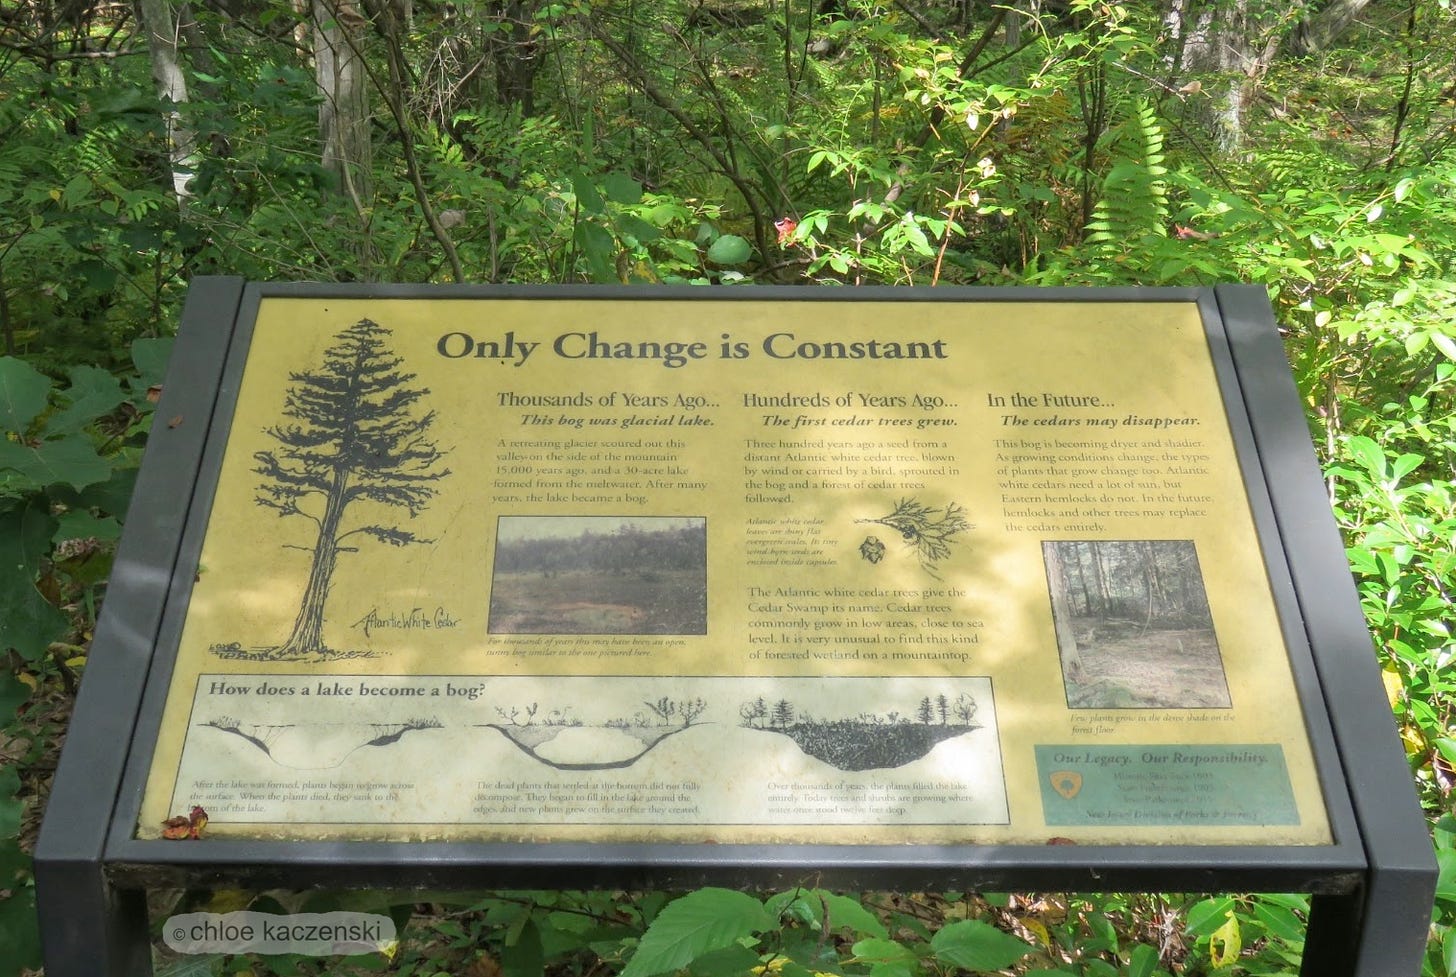 Photo of a trail information interpretive sign with the heading stating “Only Change is Constant” surrounded by green bushes trees and ferns.